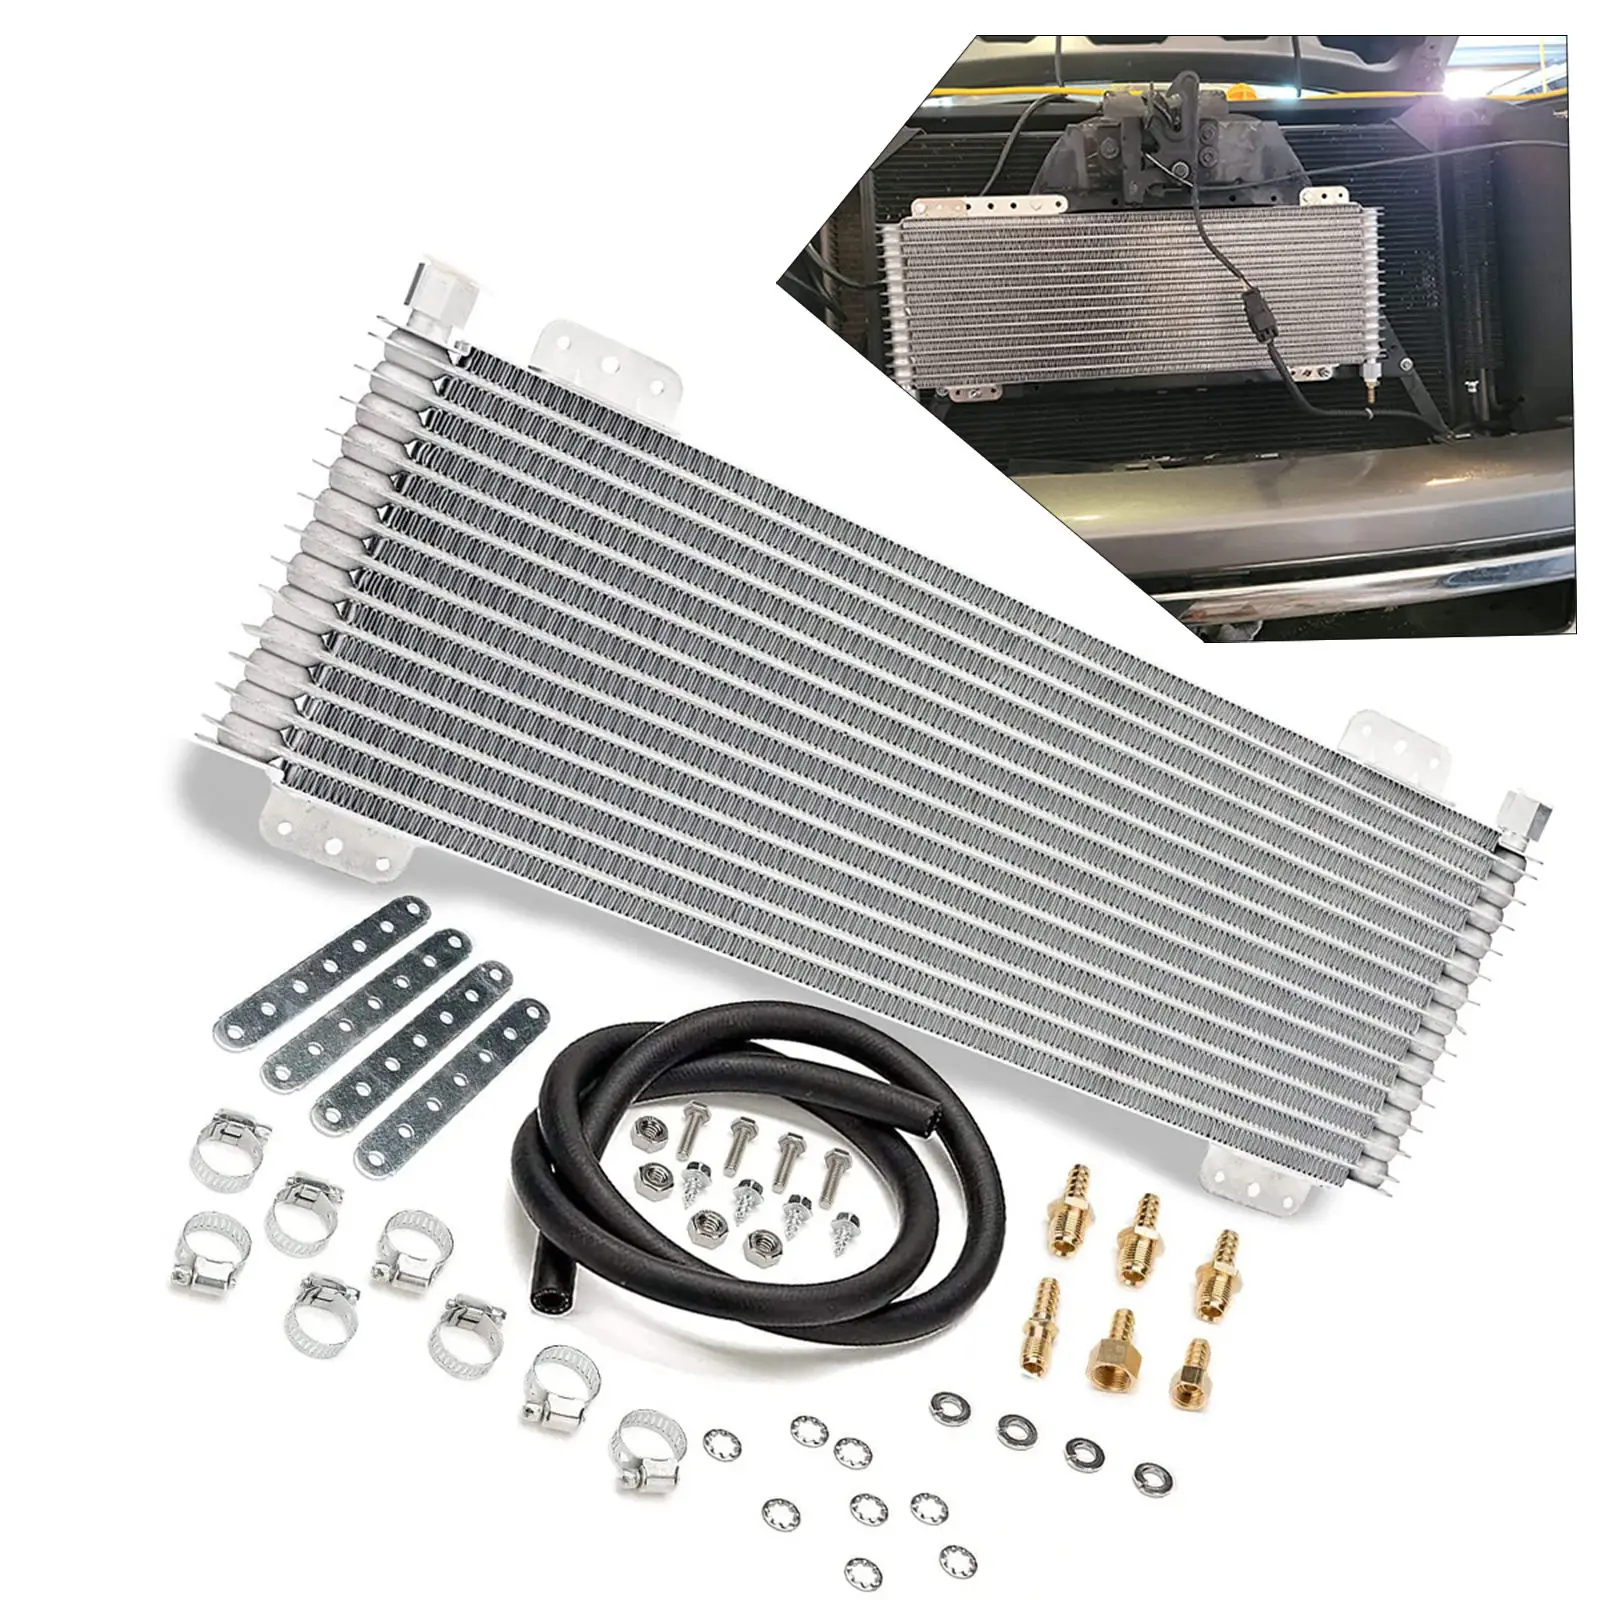 Heavy Duty Transmission Oil Cooler Low Pressure Drop LPD47391 with Mounting Hardware Cooling Protection Towing Applications